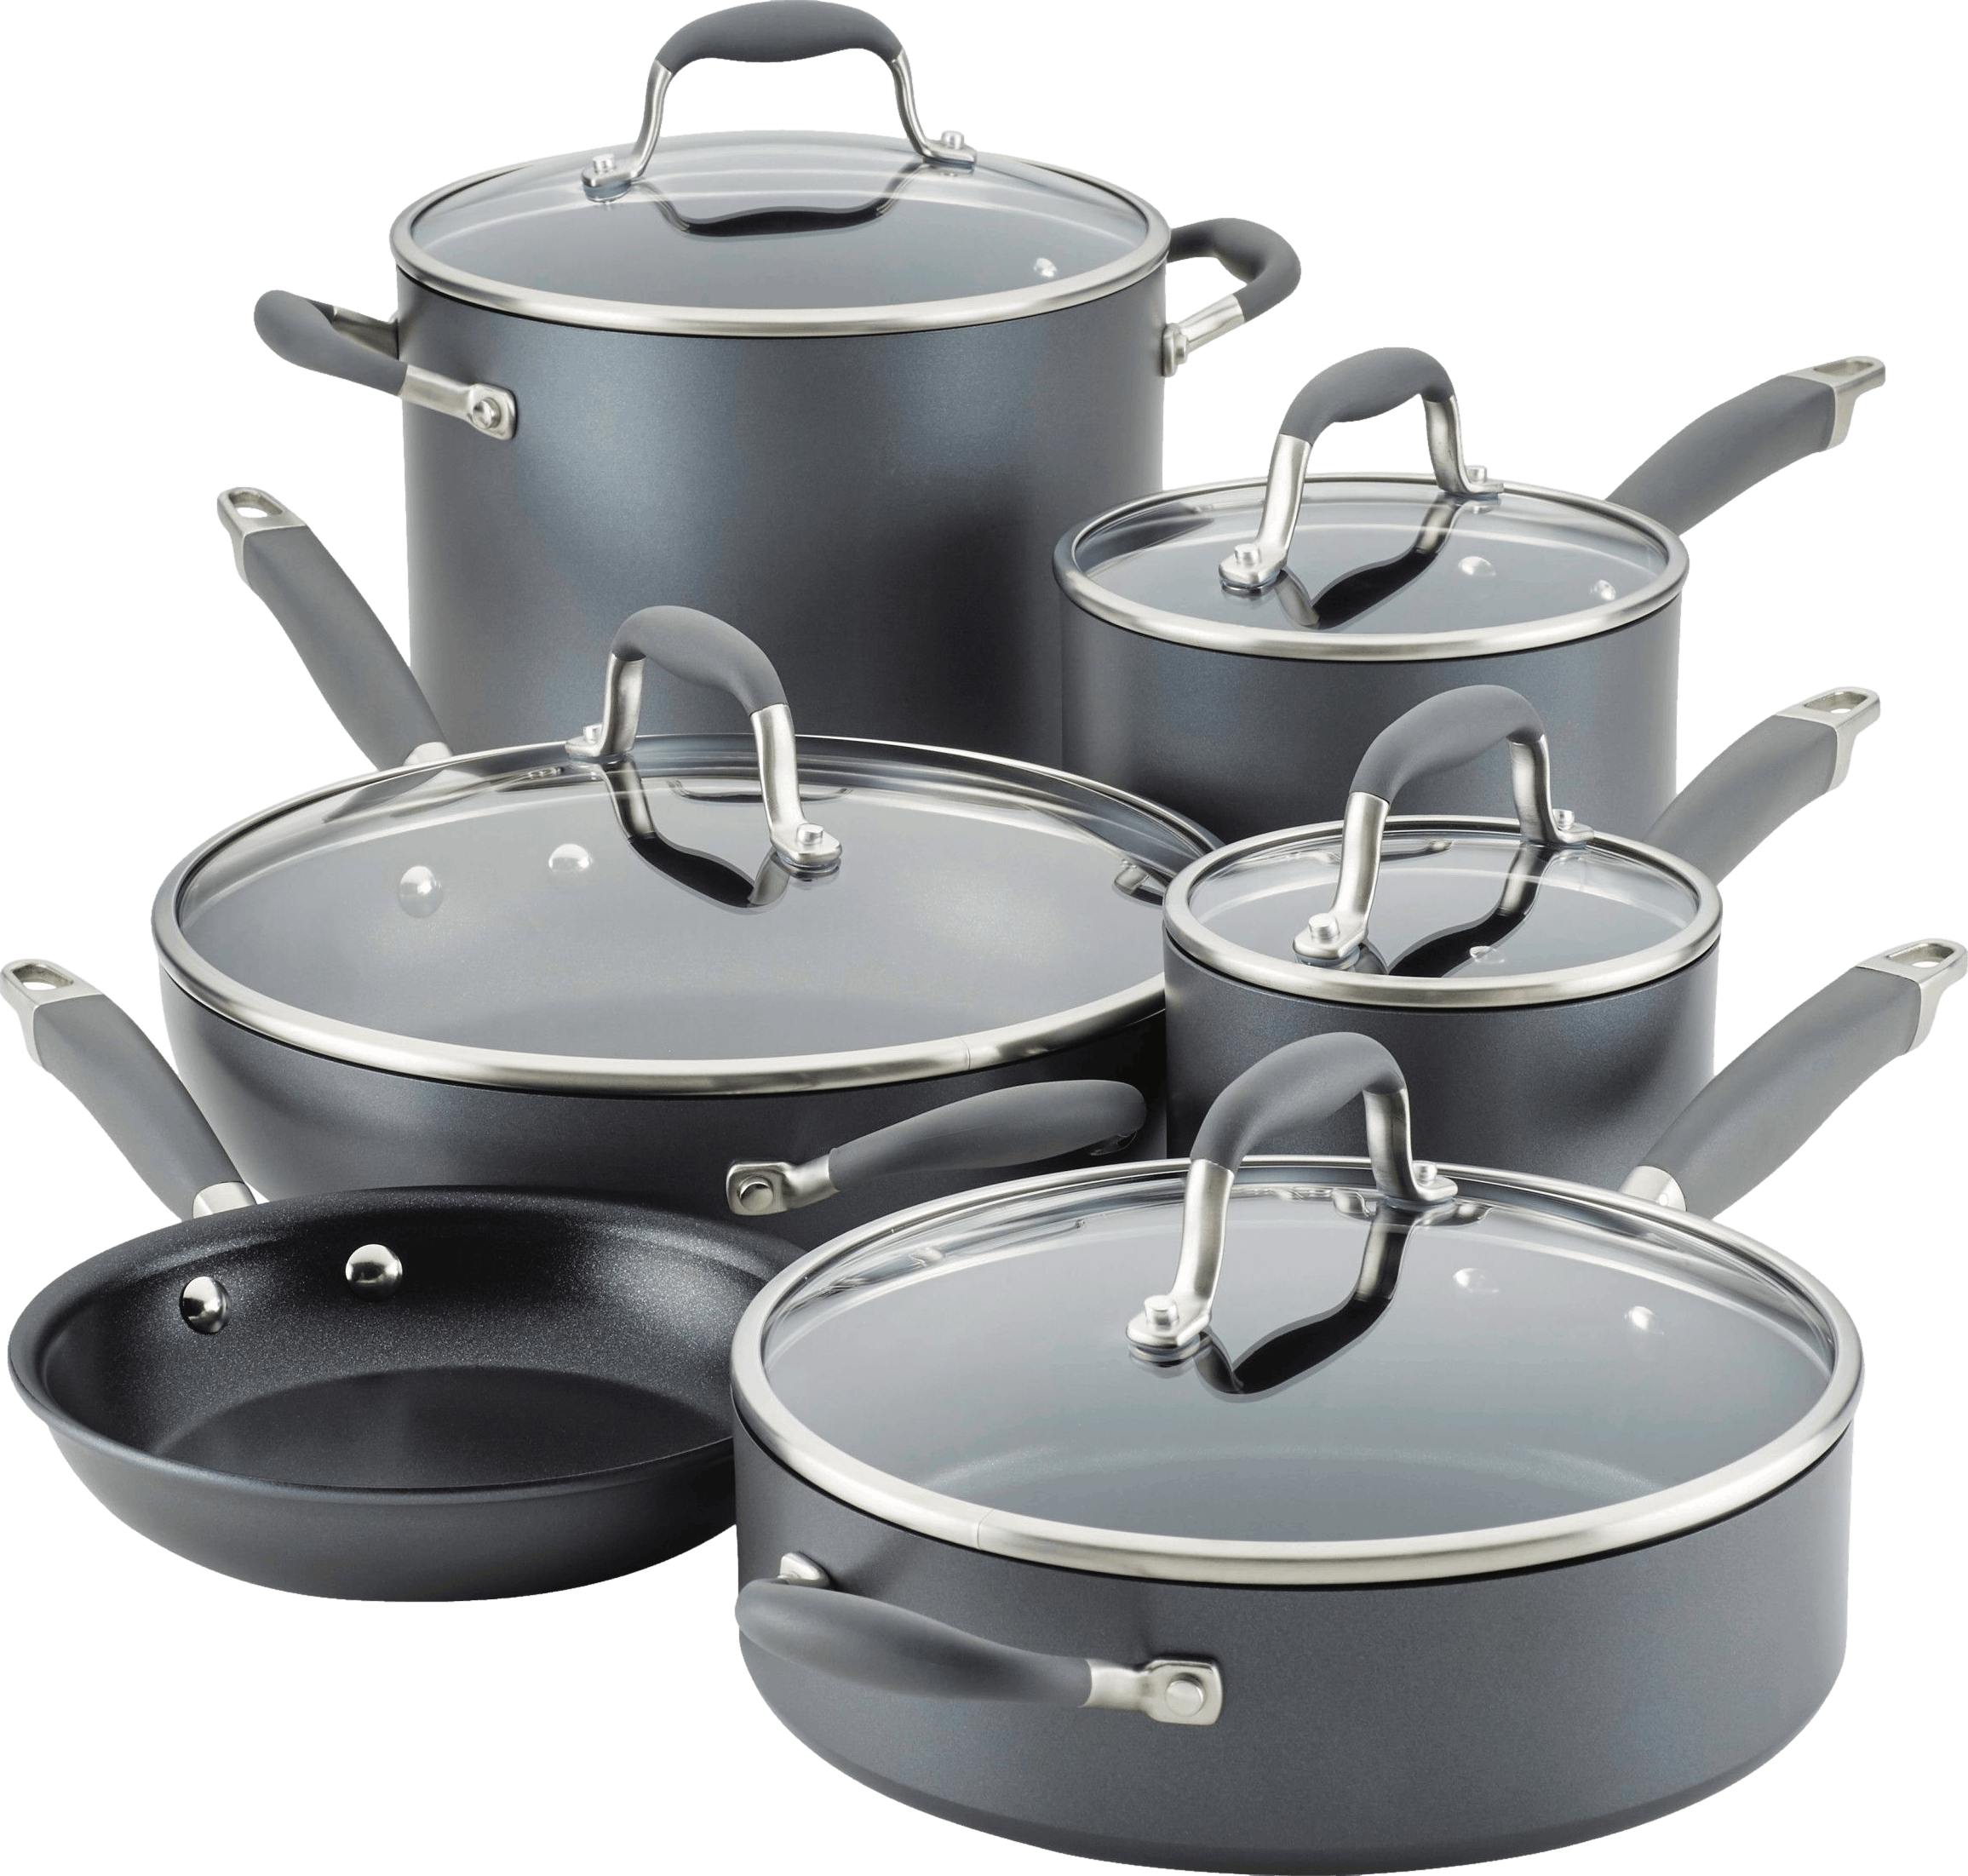 LEGEND COOKWARE 11 pc Pots, Pans, and Cast Iron Pizza Pan Bundle Silver |  Pro Quality 3-Ply Clad Cookware for Oven, Induction, Cooking, Pizza